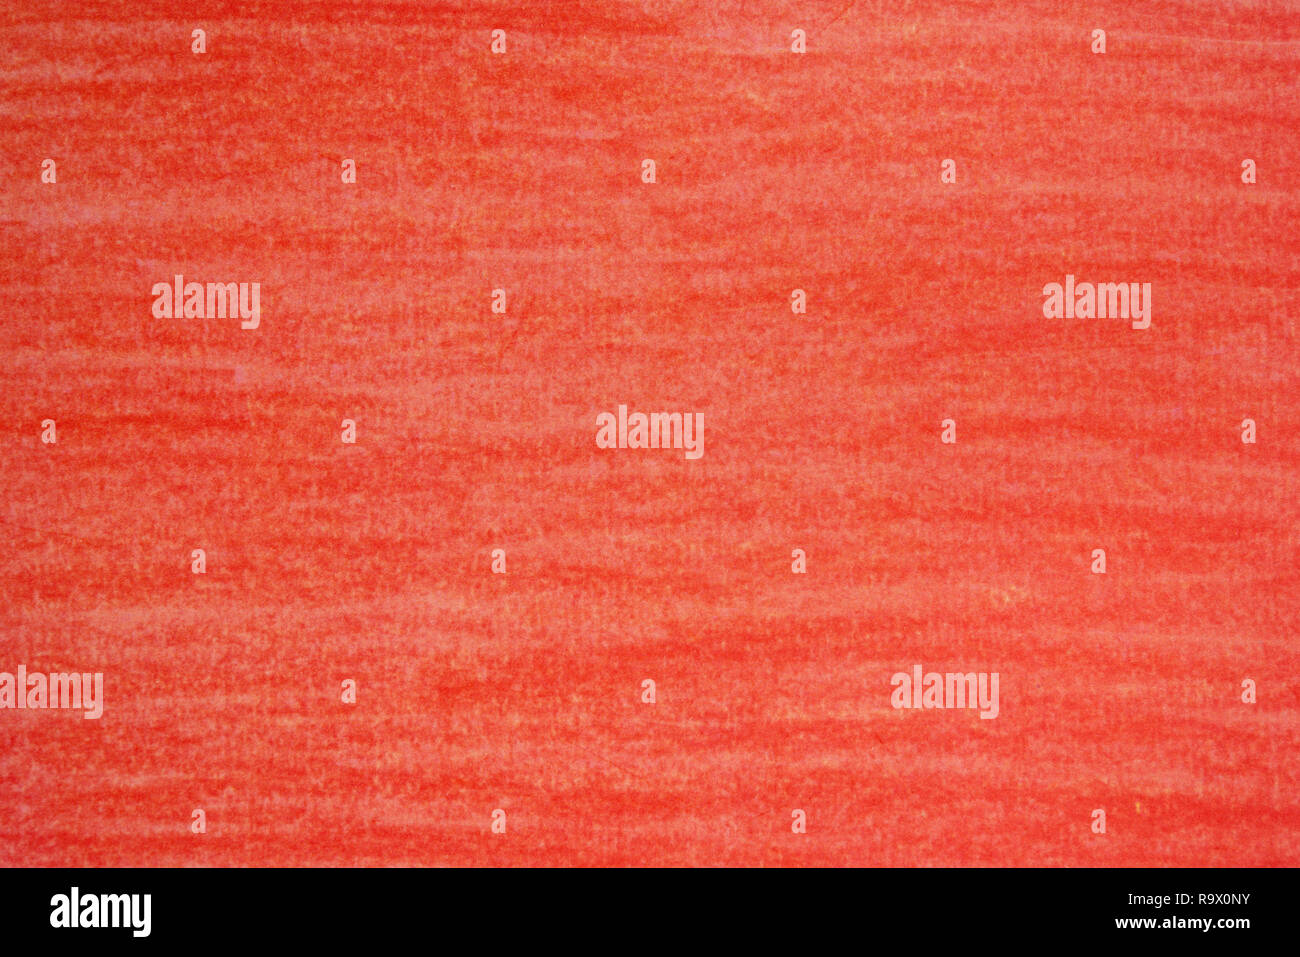 Red pencil drawings on white paper background texture. Stock Photo